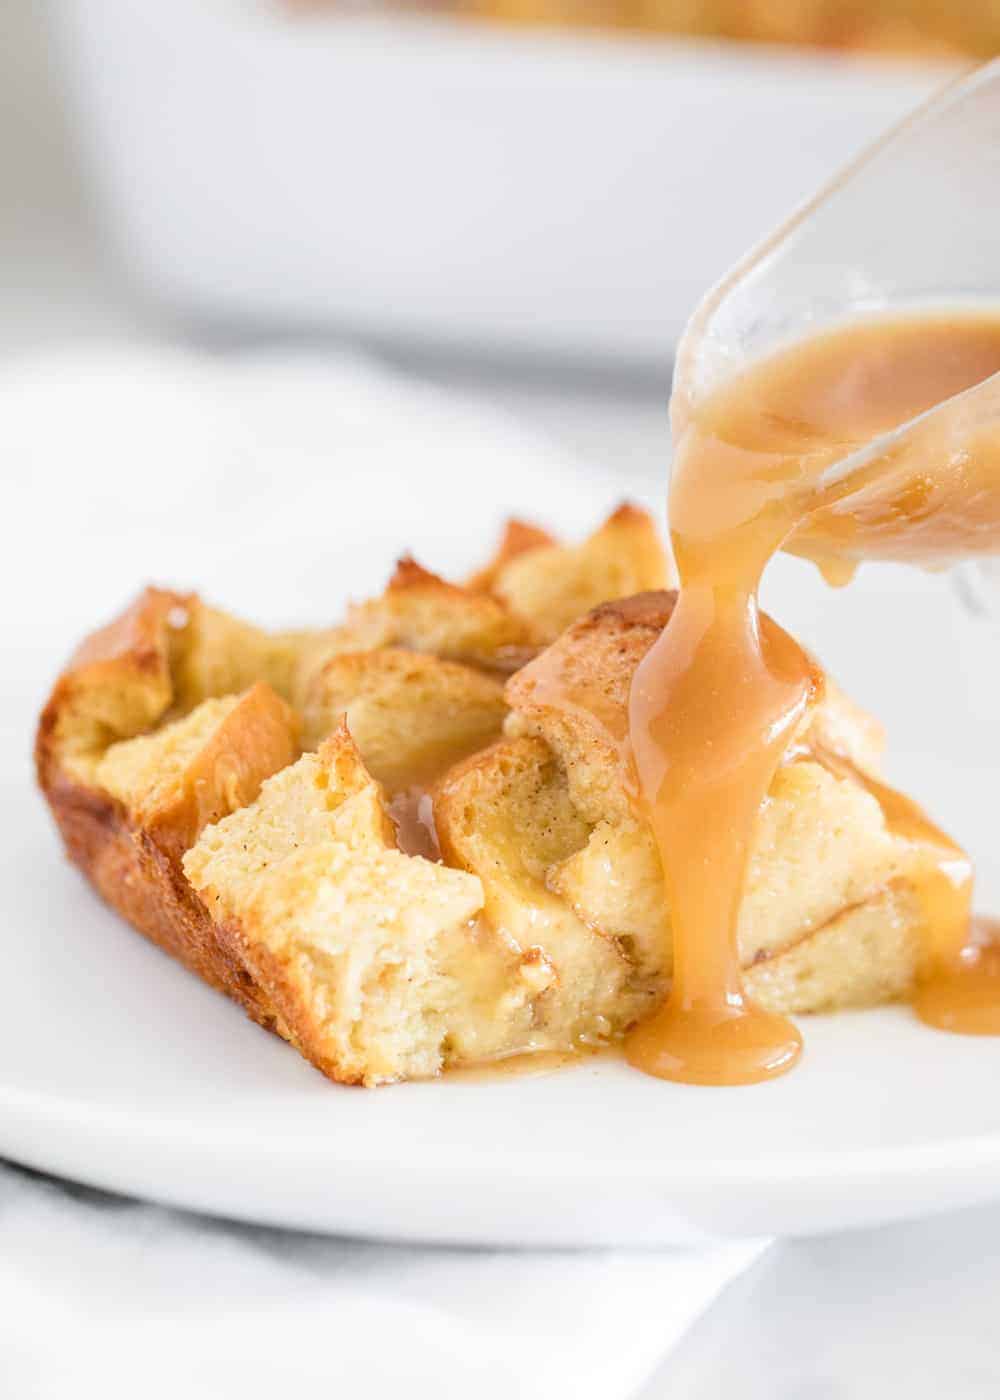 Pouring caramel sauce over a slice of bread pudding.